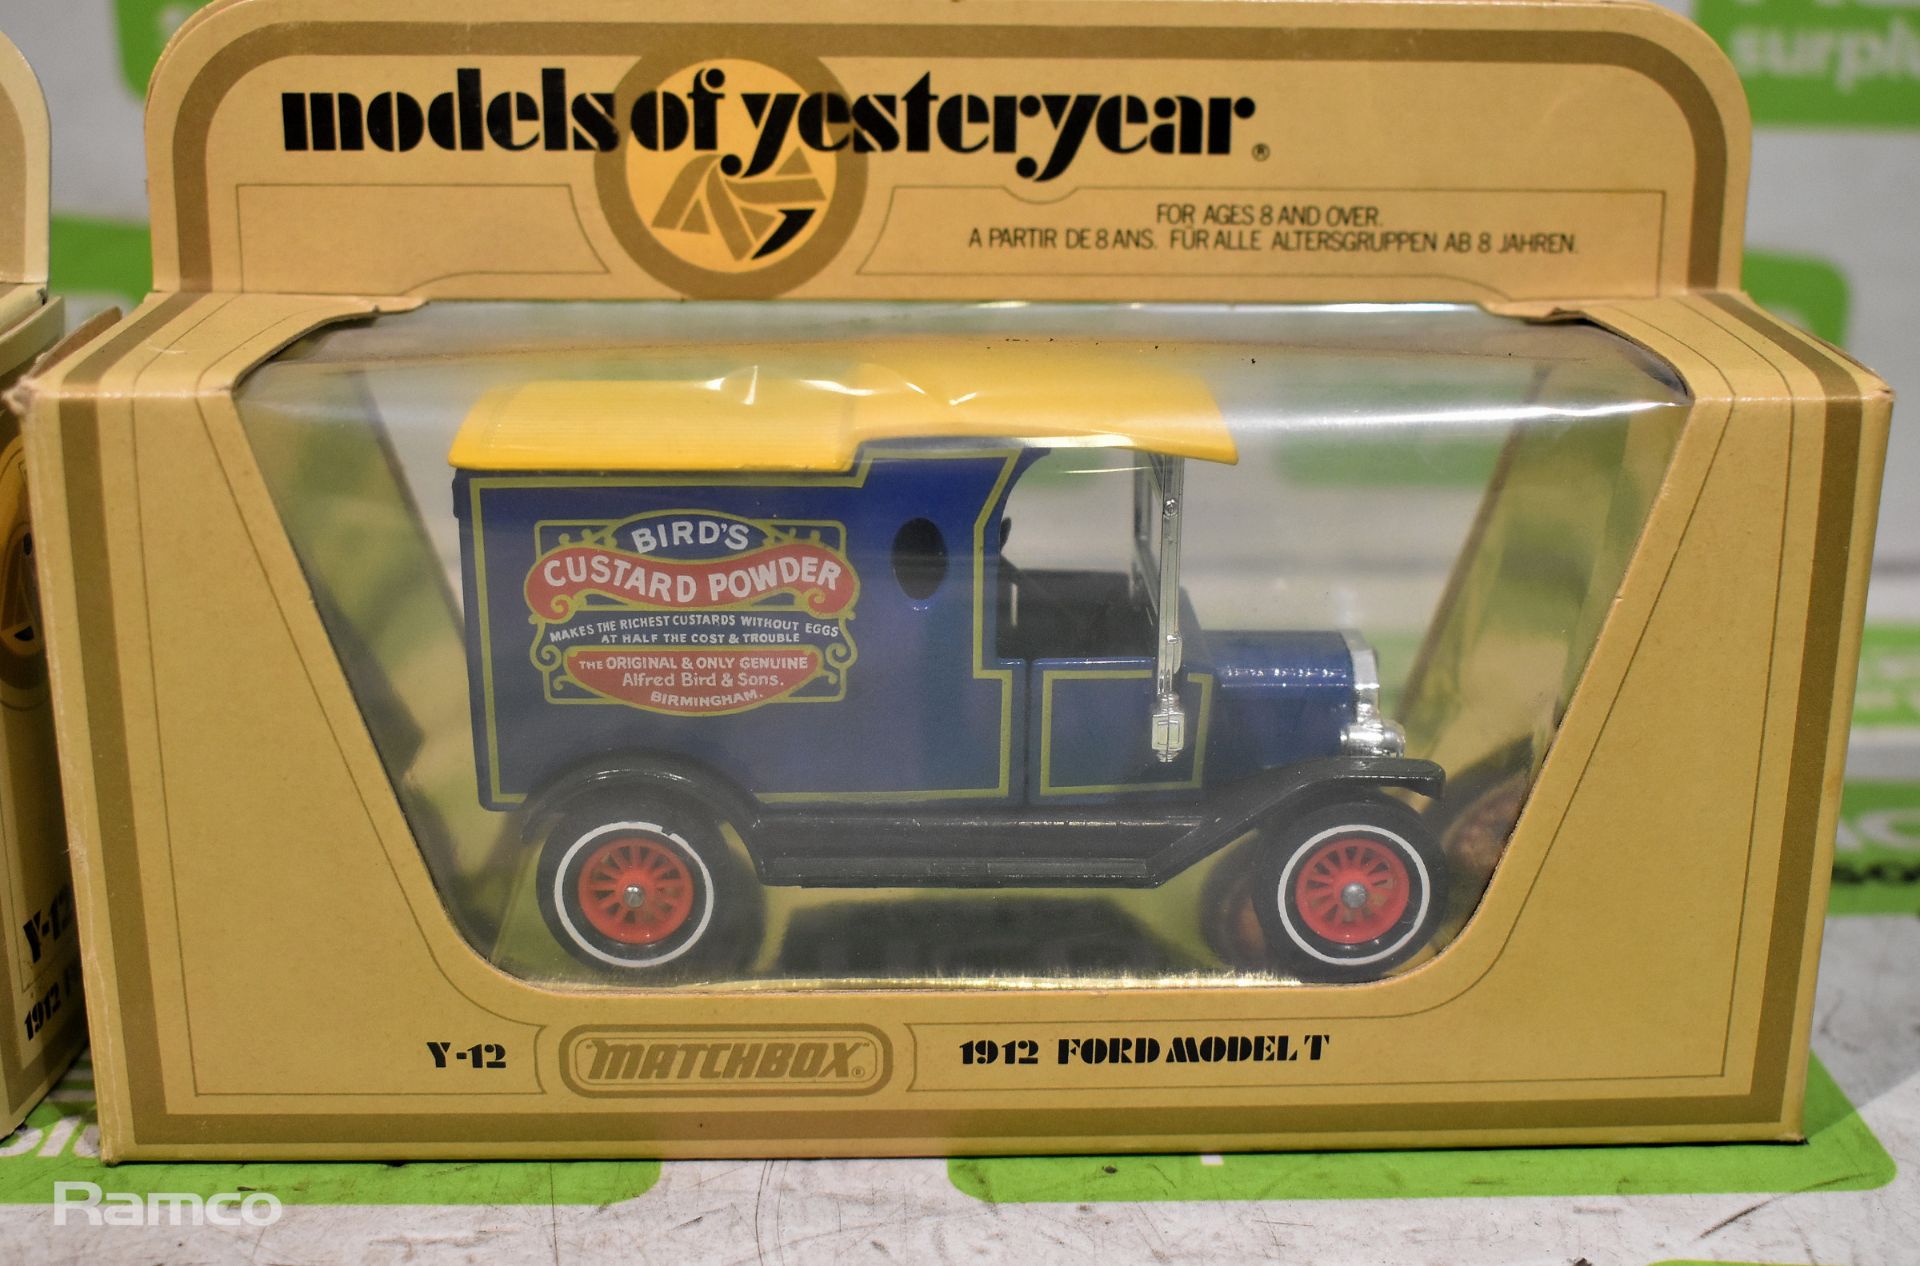 Models of Yesteryear Y-12 - 1912 Ford Model T - Bird's Custard Powder Livery - 1:35 scale model - Image 3 of 5